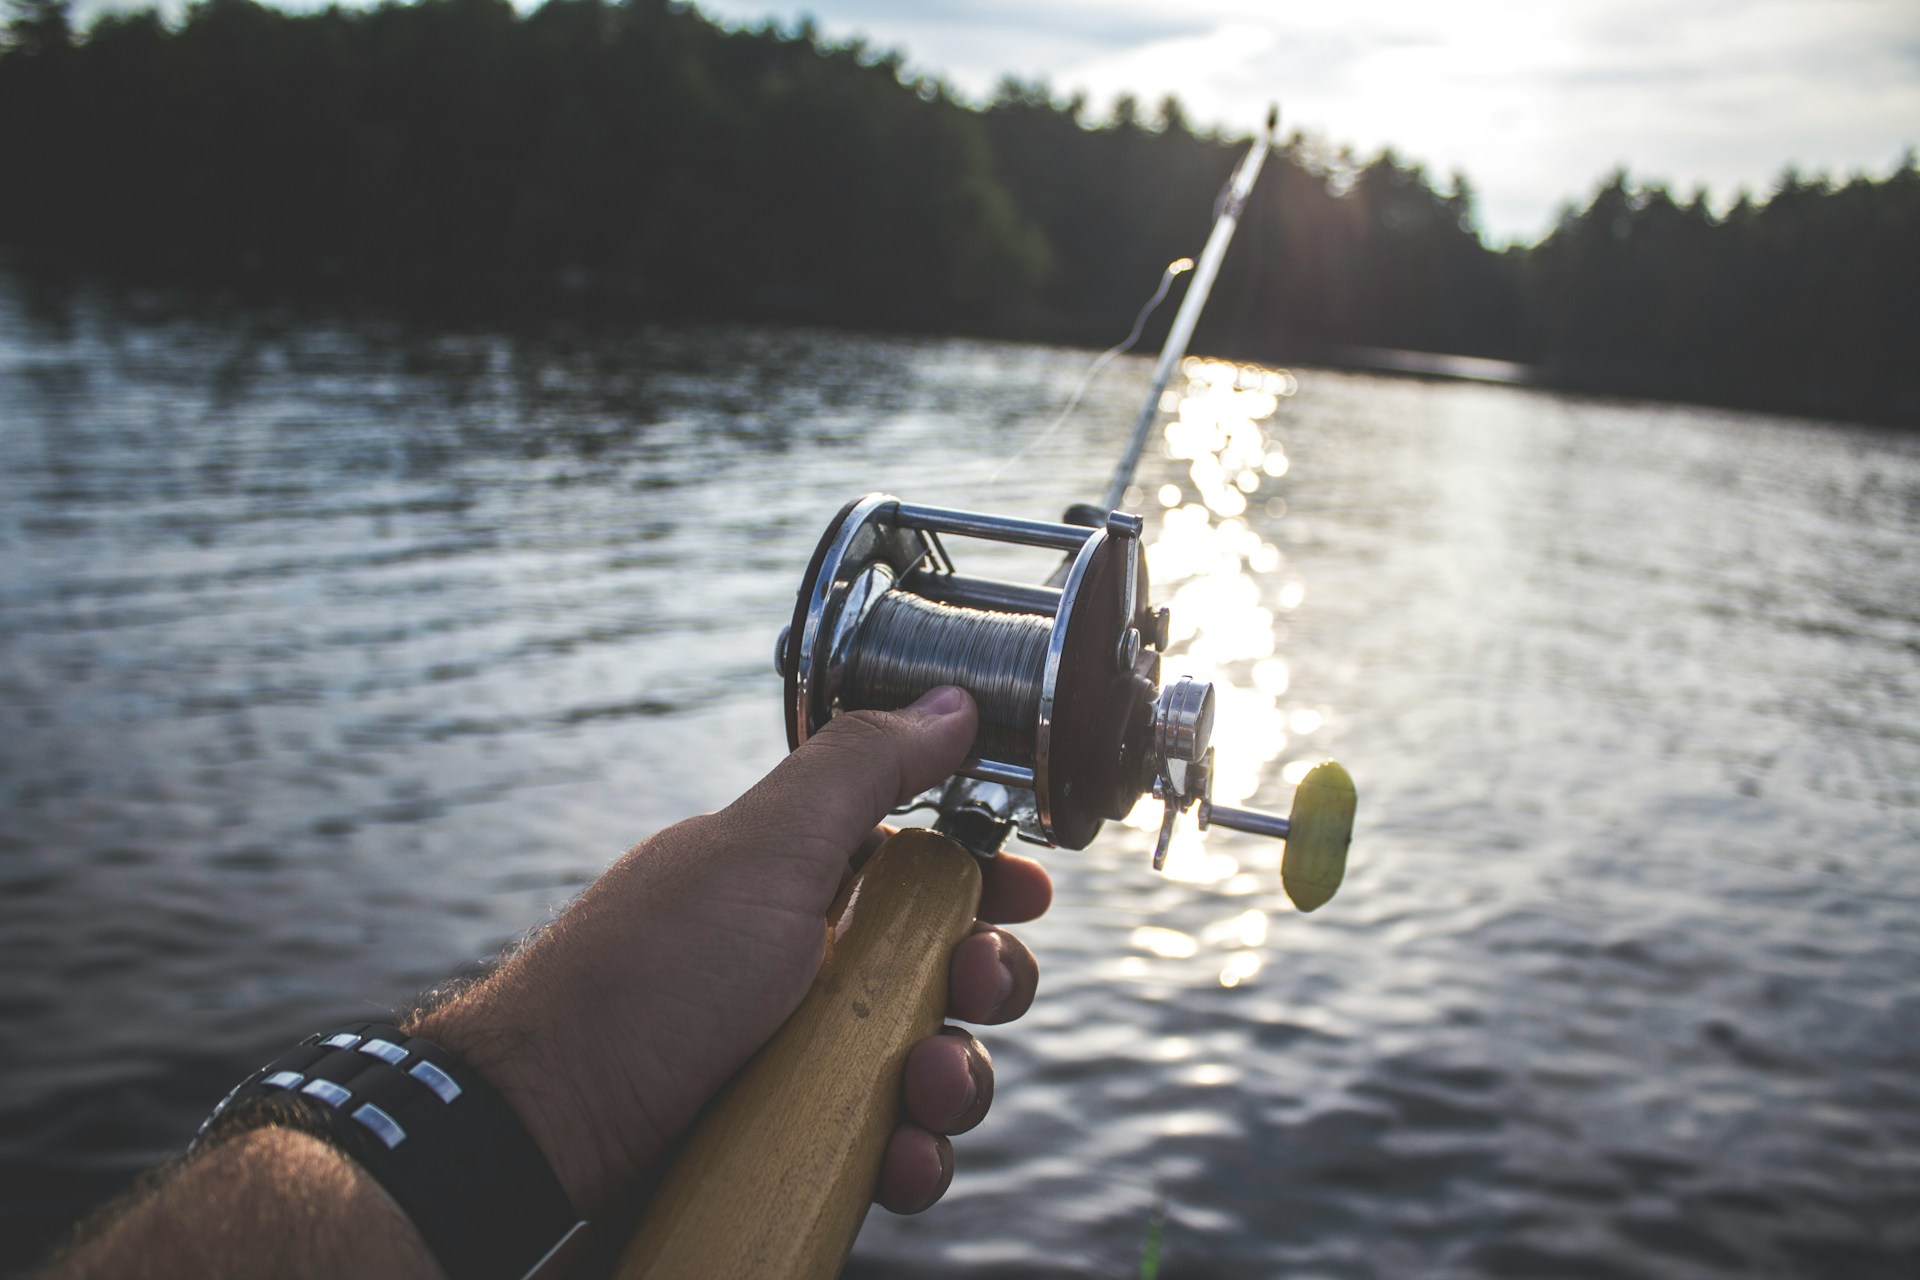 In this region, fishing locations are as important as having the proper skills and equipment. Check out some of the top five fishing locations in the UK.